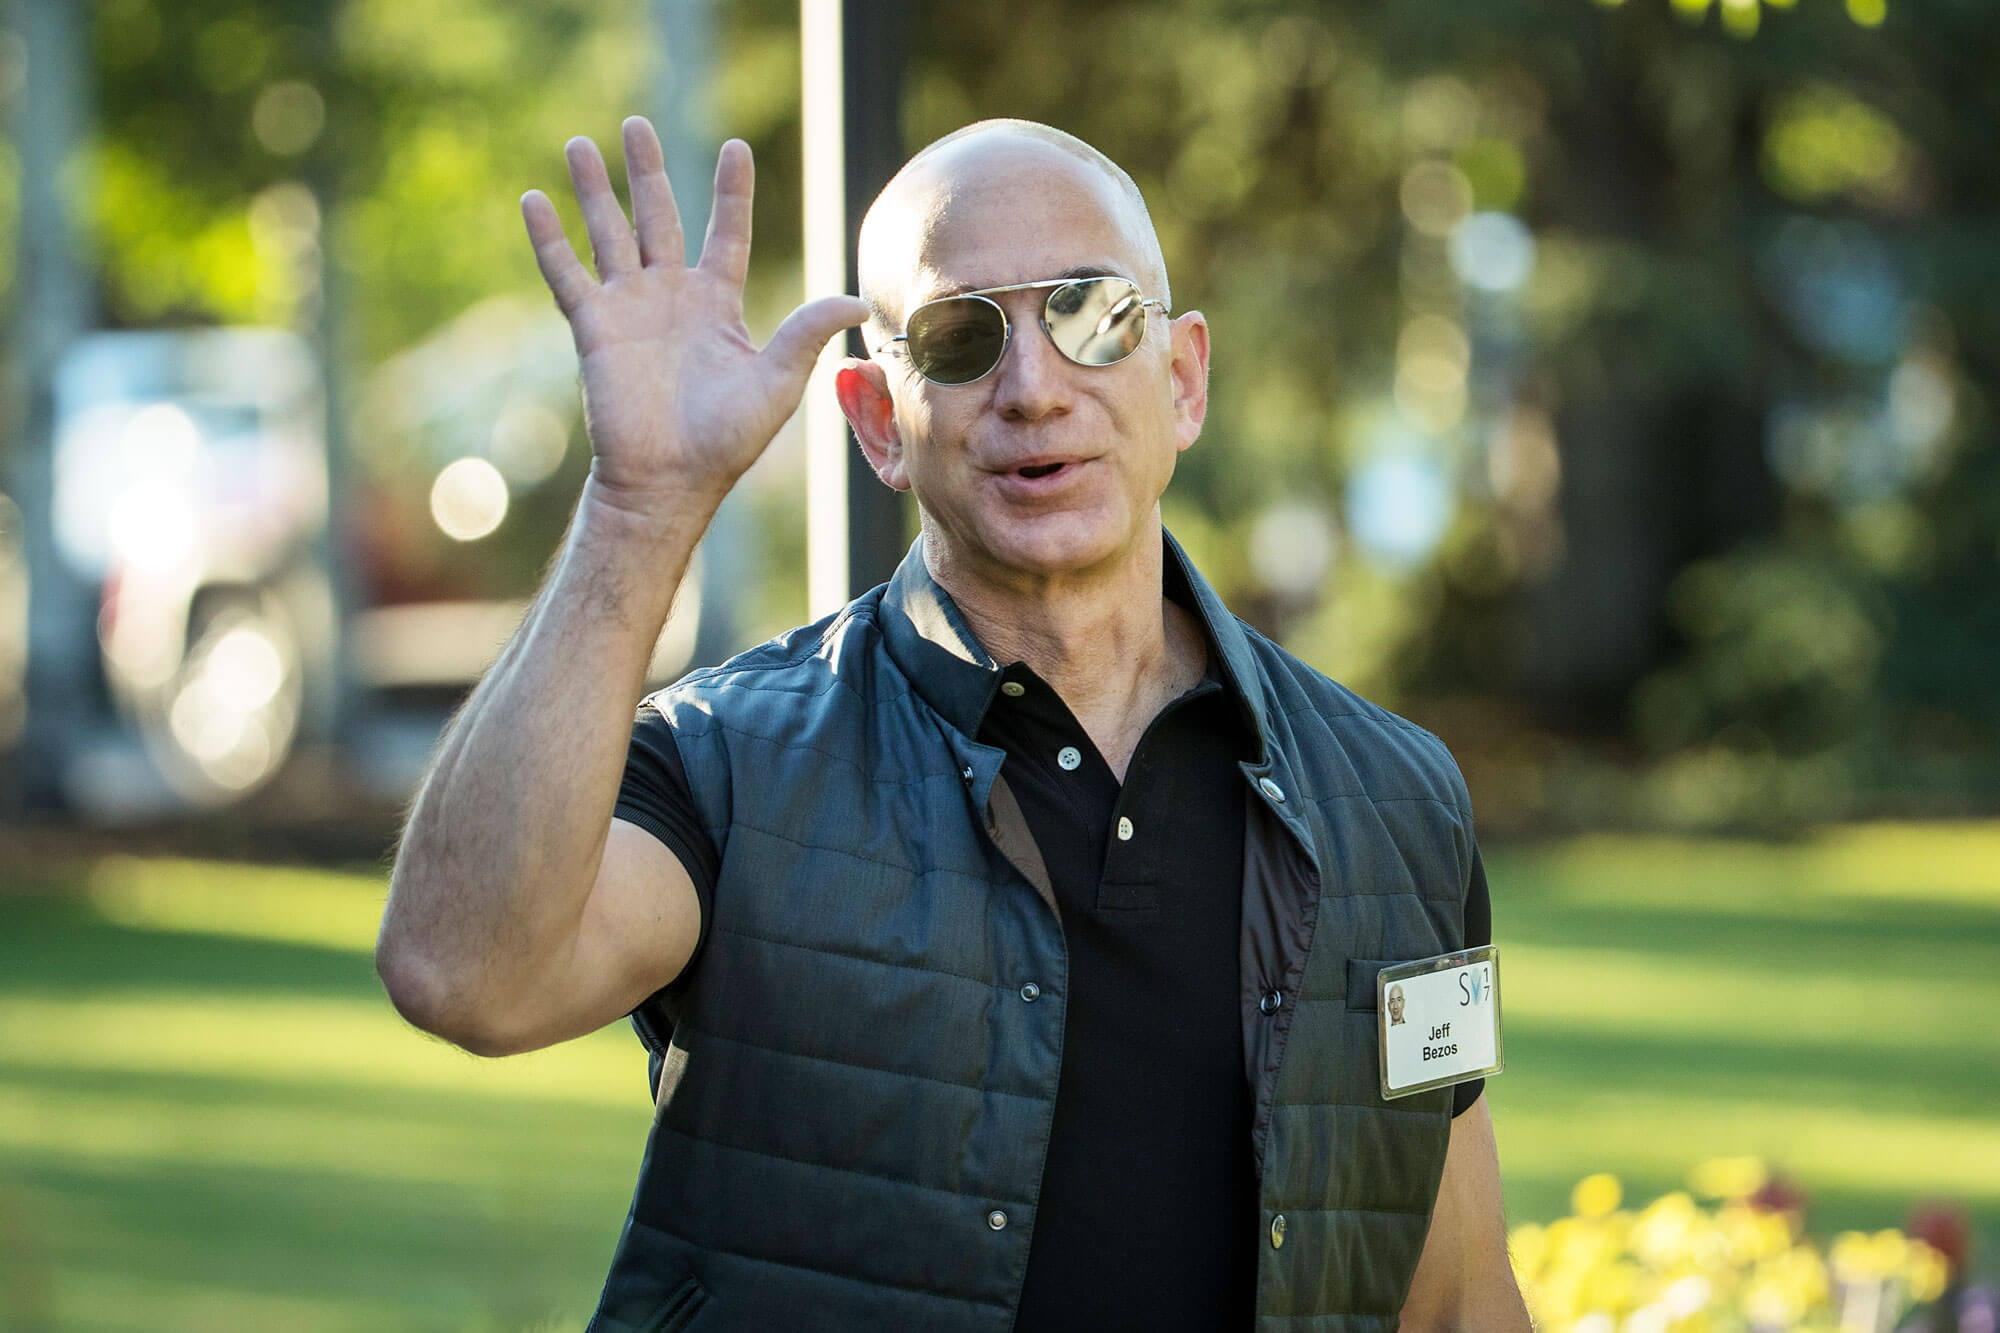 Amazon moves ahead of Alphabet to become world's second most valuable company